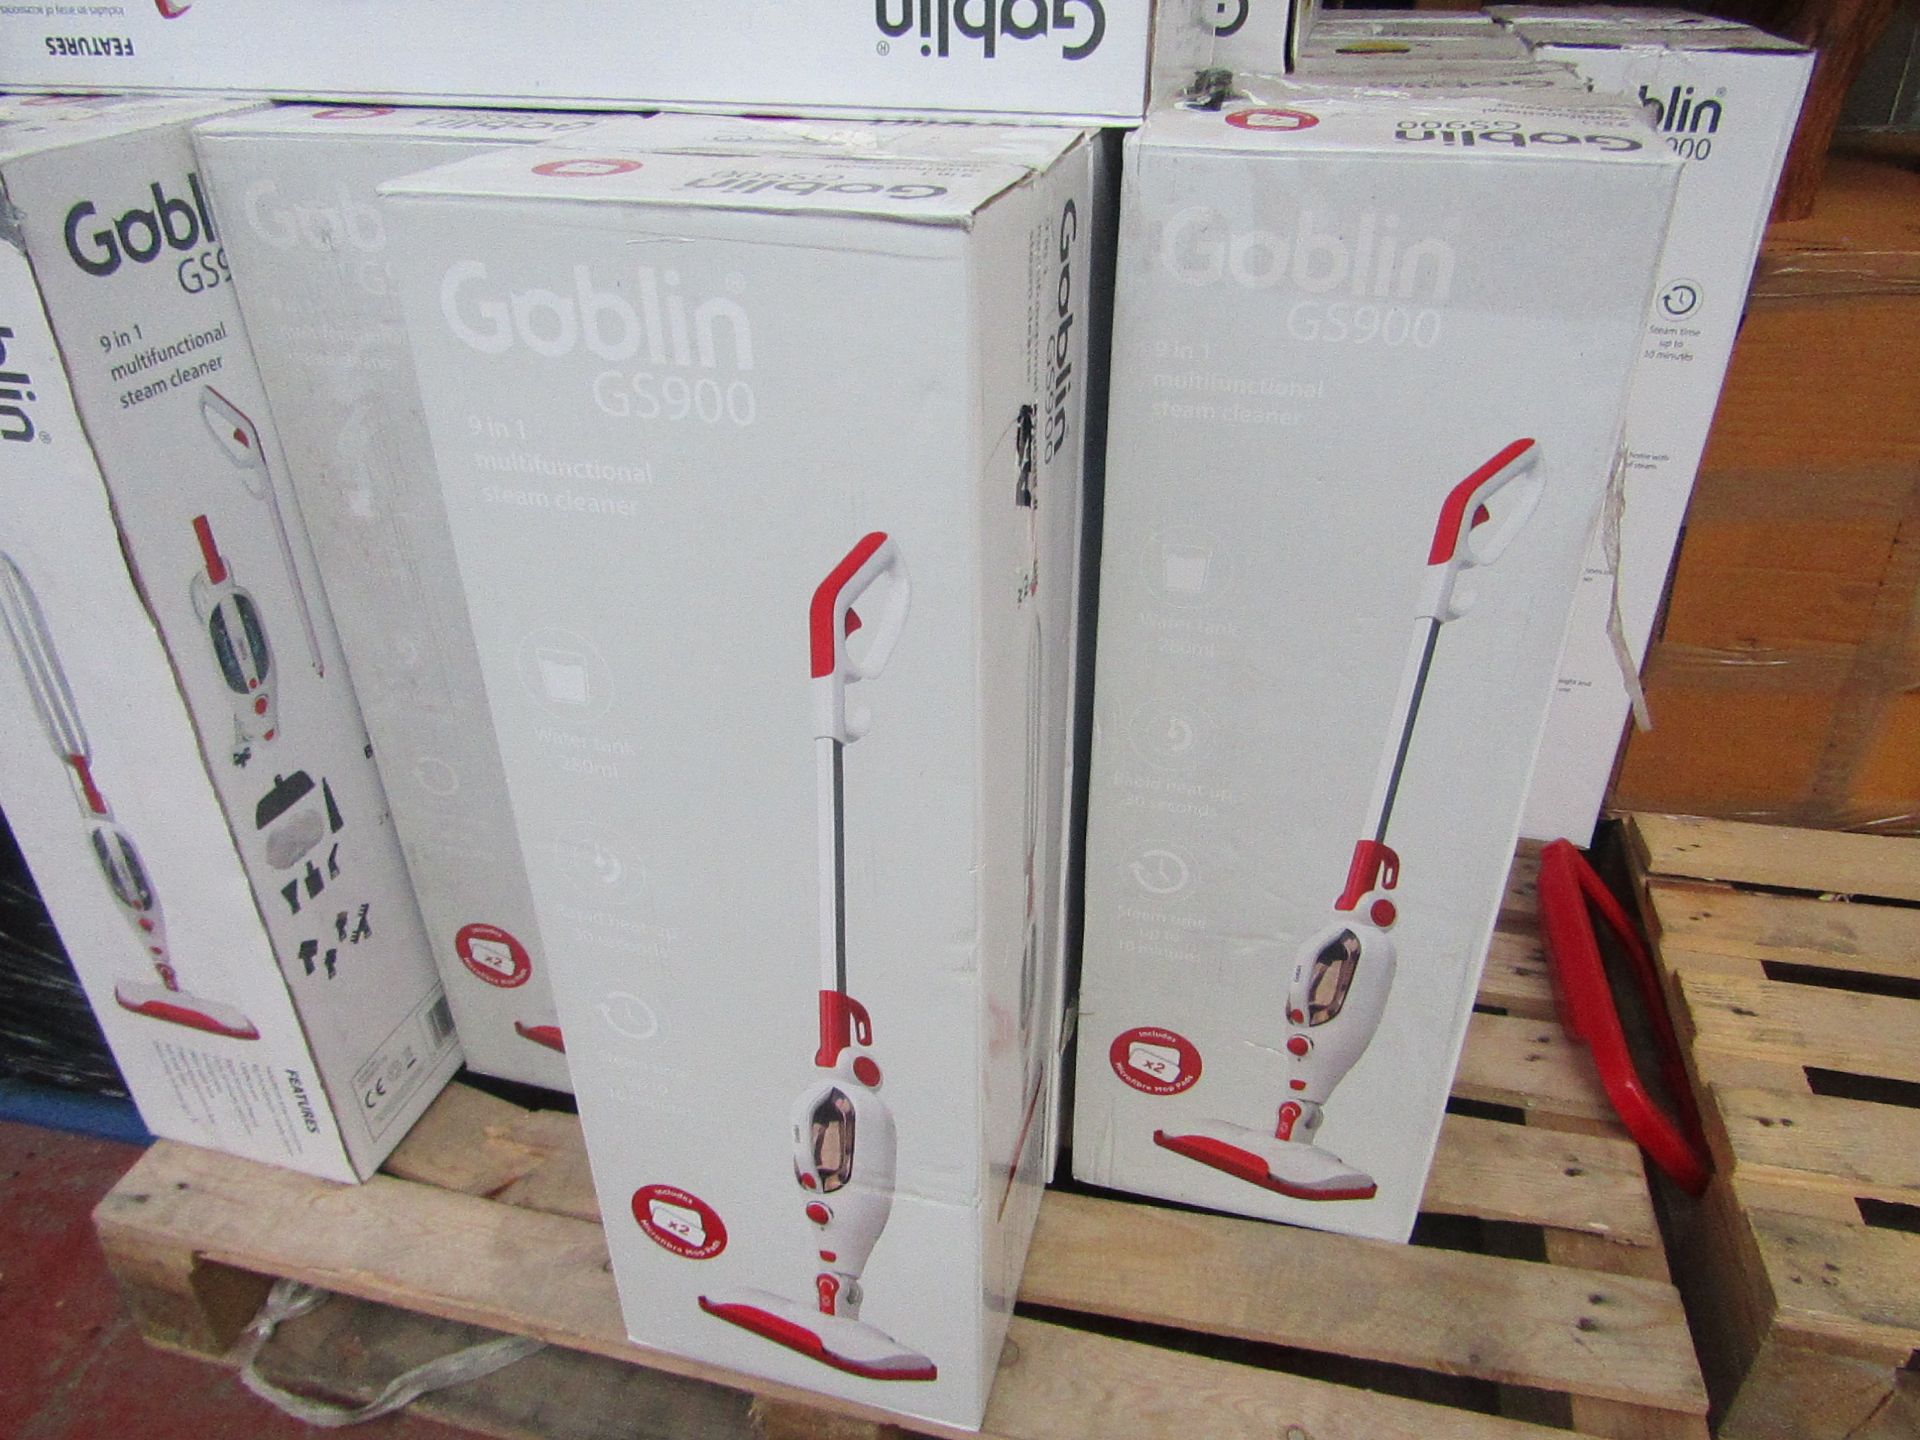 | 1X | GOBLIN WHITE 9 IN 1 MULTIFUNCTIONAL STEAM CLEANER | UNCHECKED AND BOXED | NO ONLINE